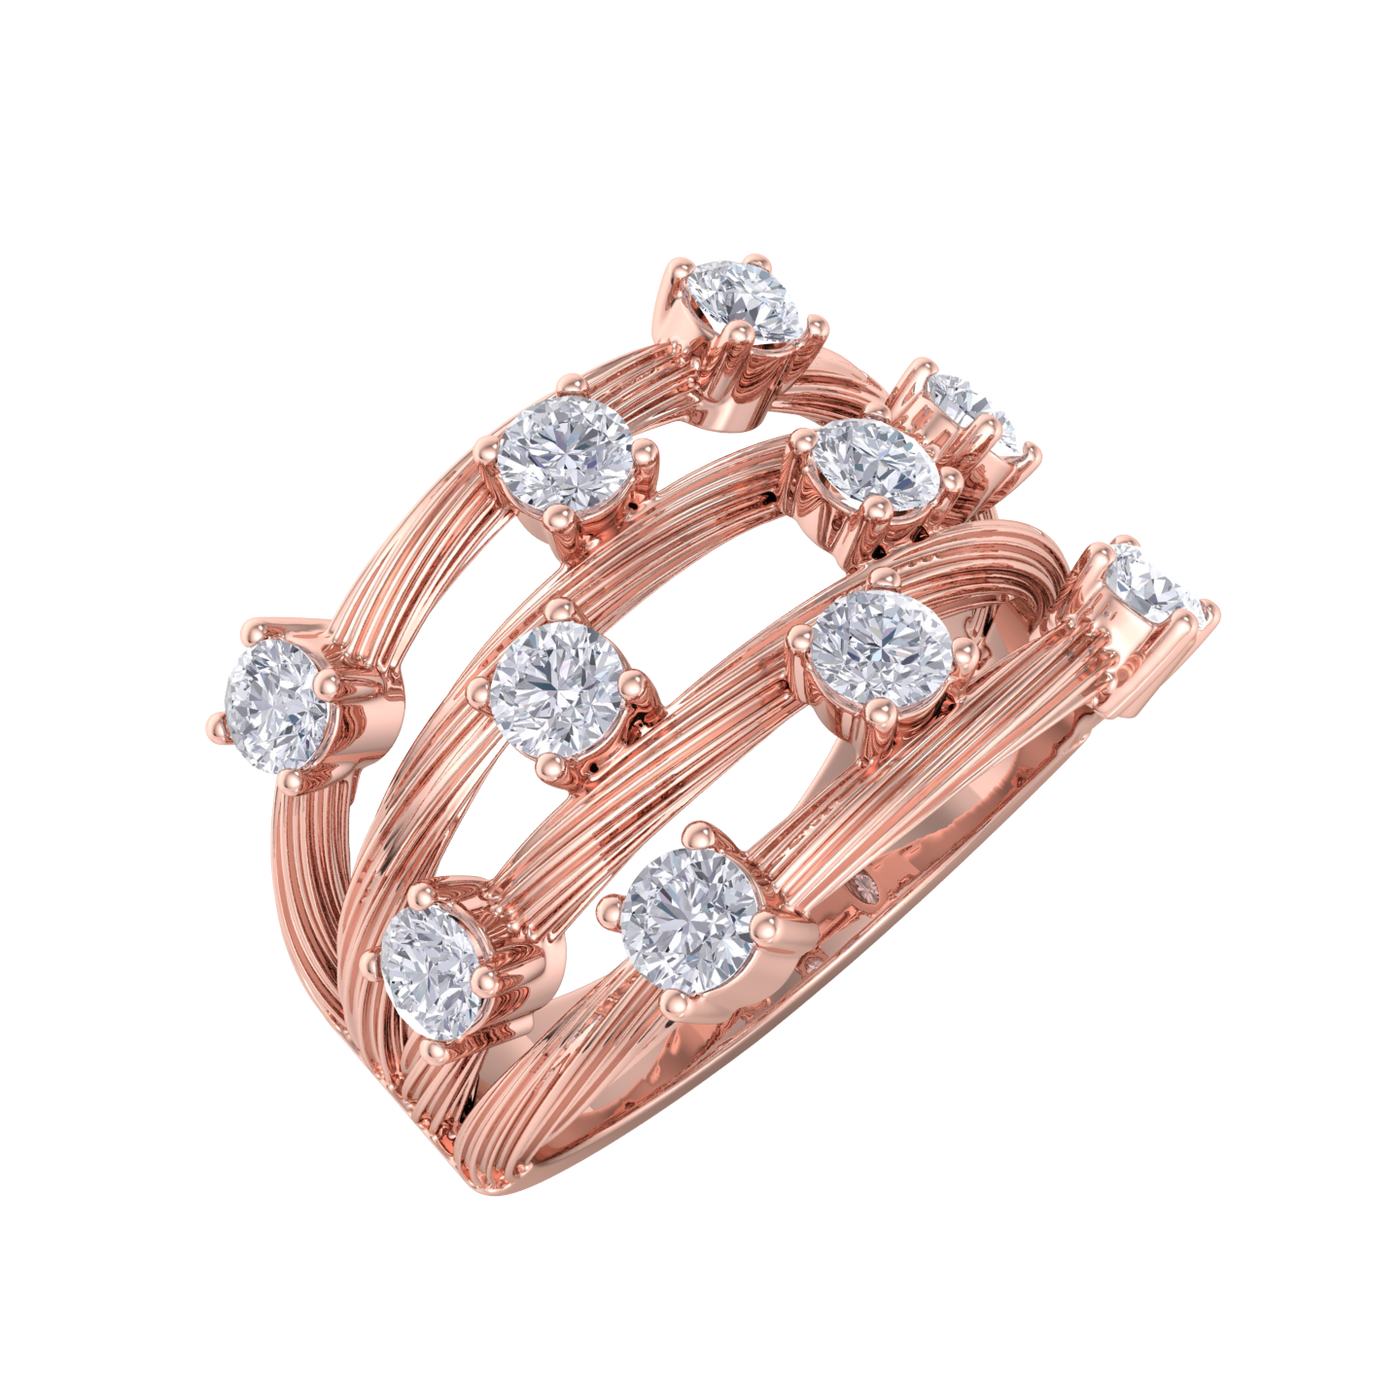 Multi-band ring in rose gold with white diamonds of 0.90 ct in weight